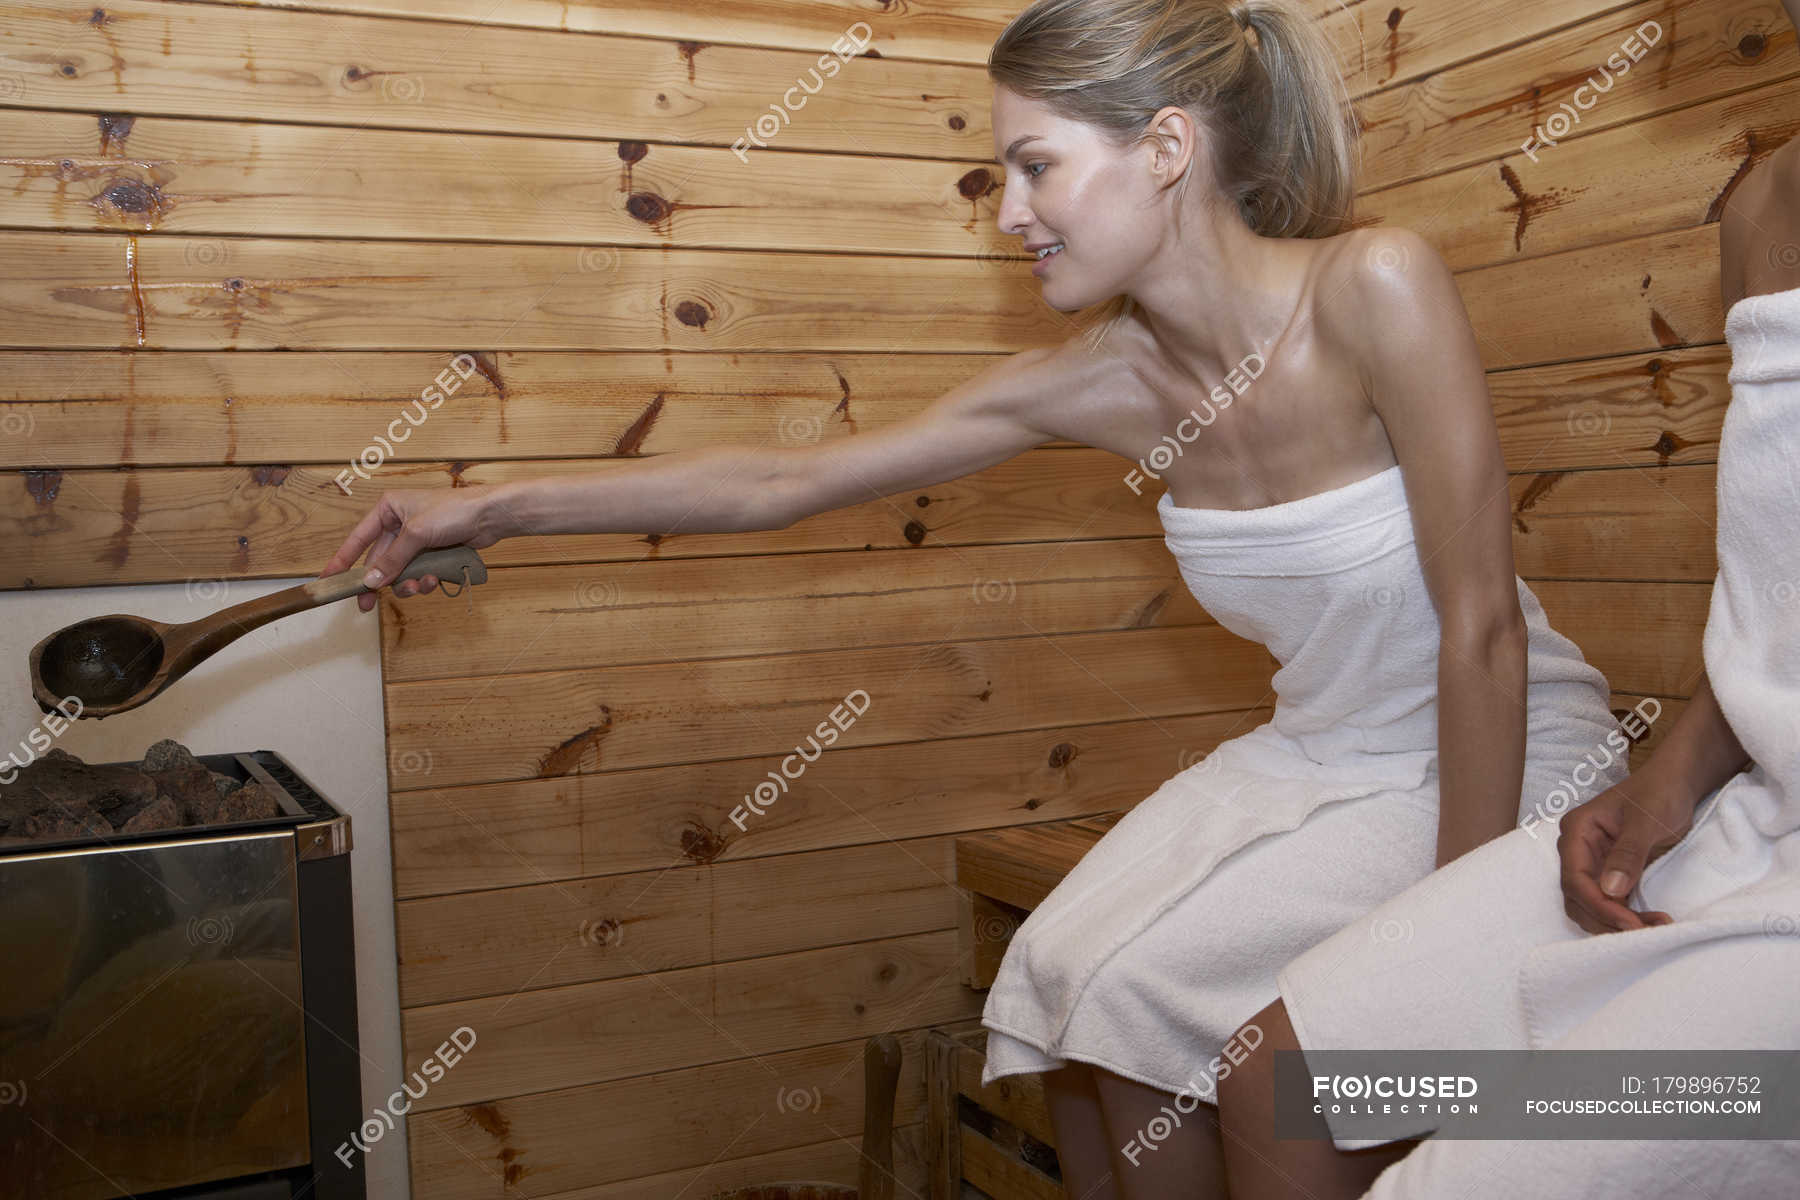 Two young women sitting in a sauna — 20 30 years, Casual Clothing - Stock  Photo | #179896752